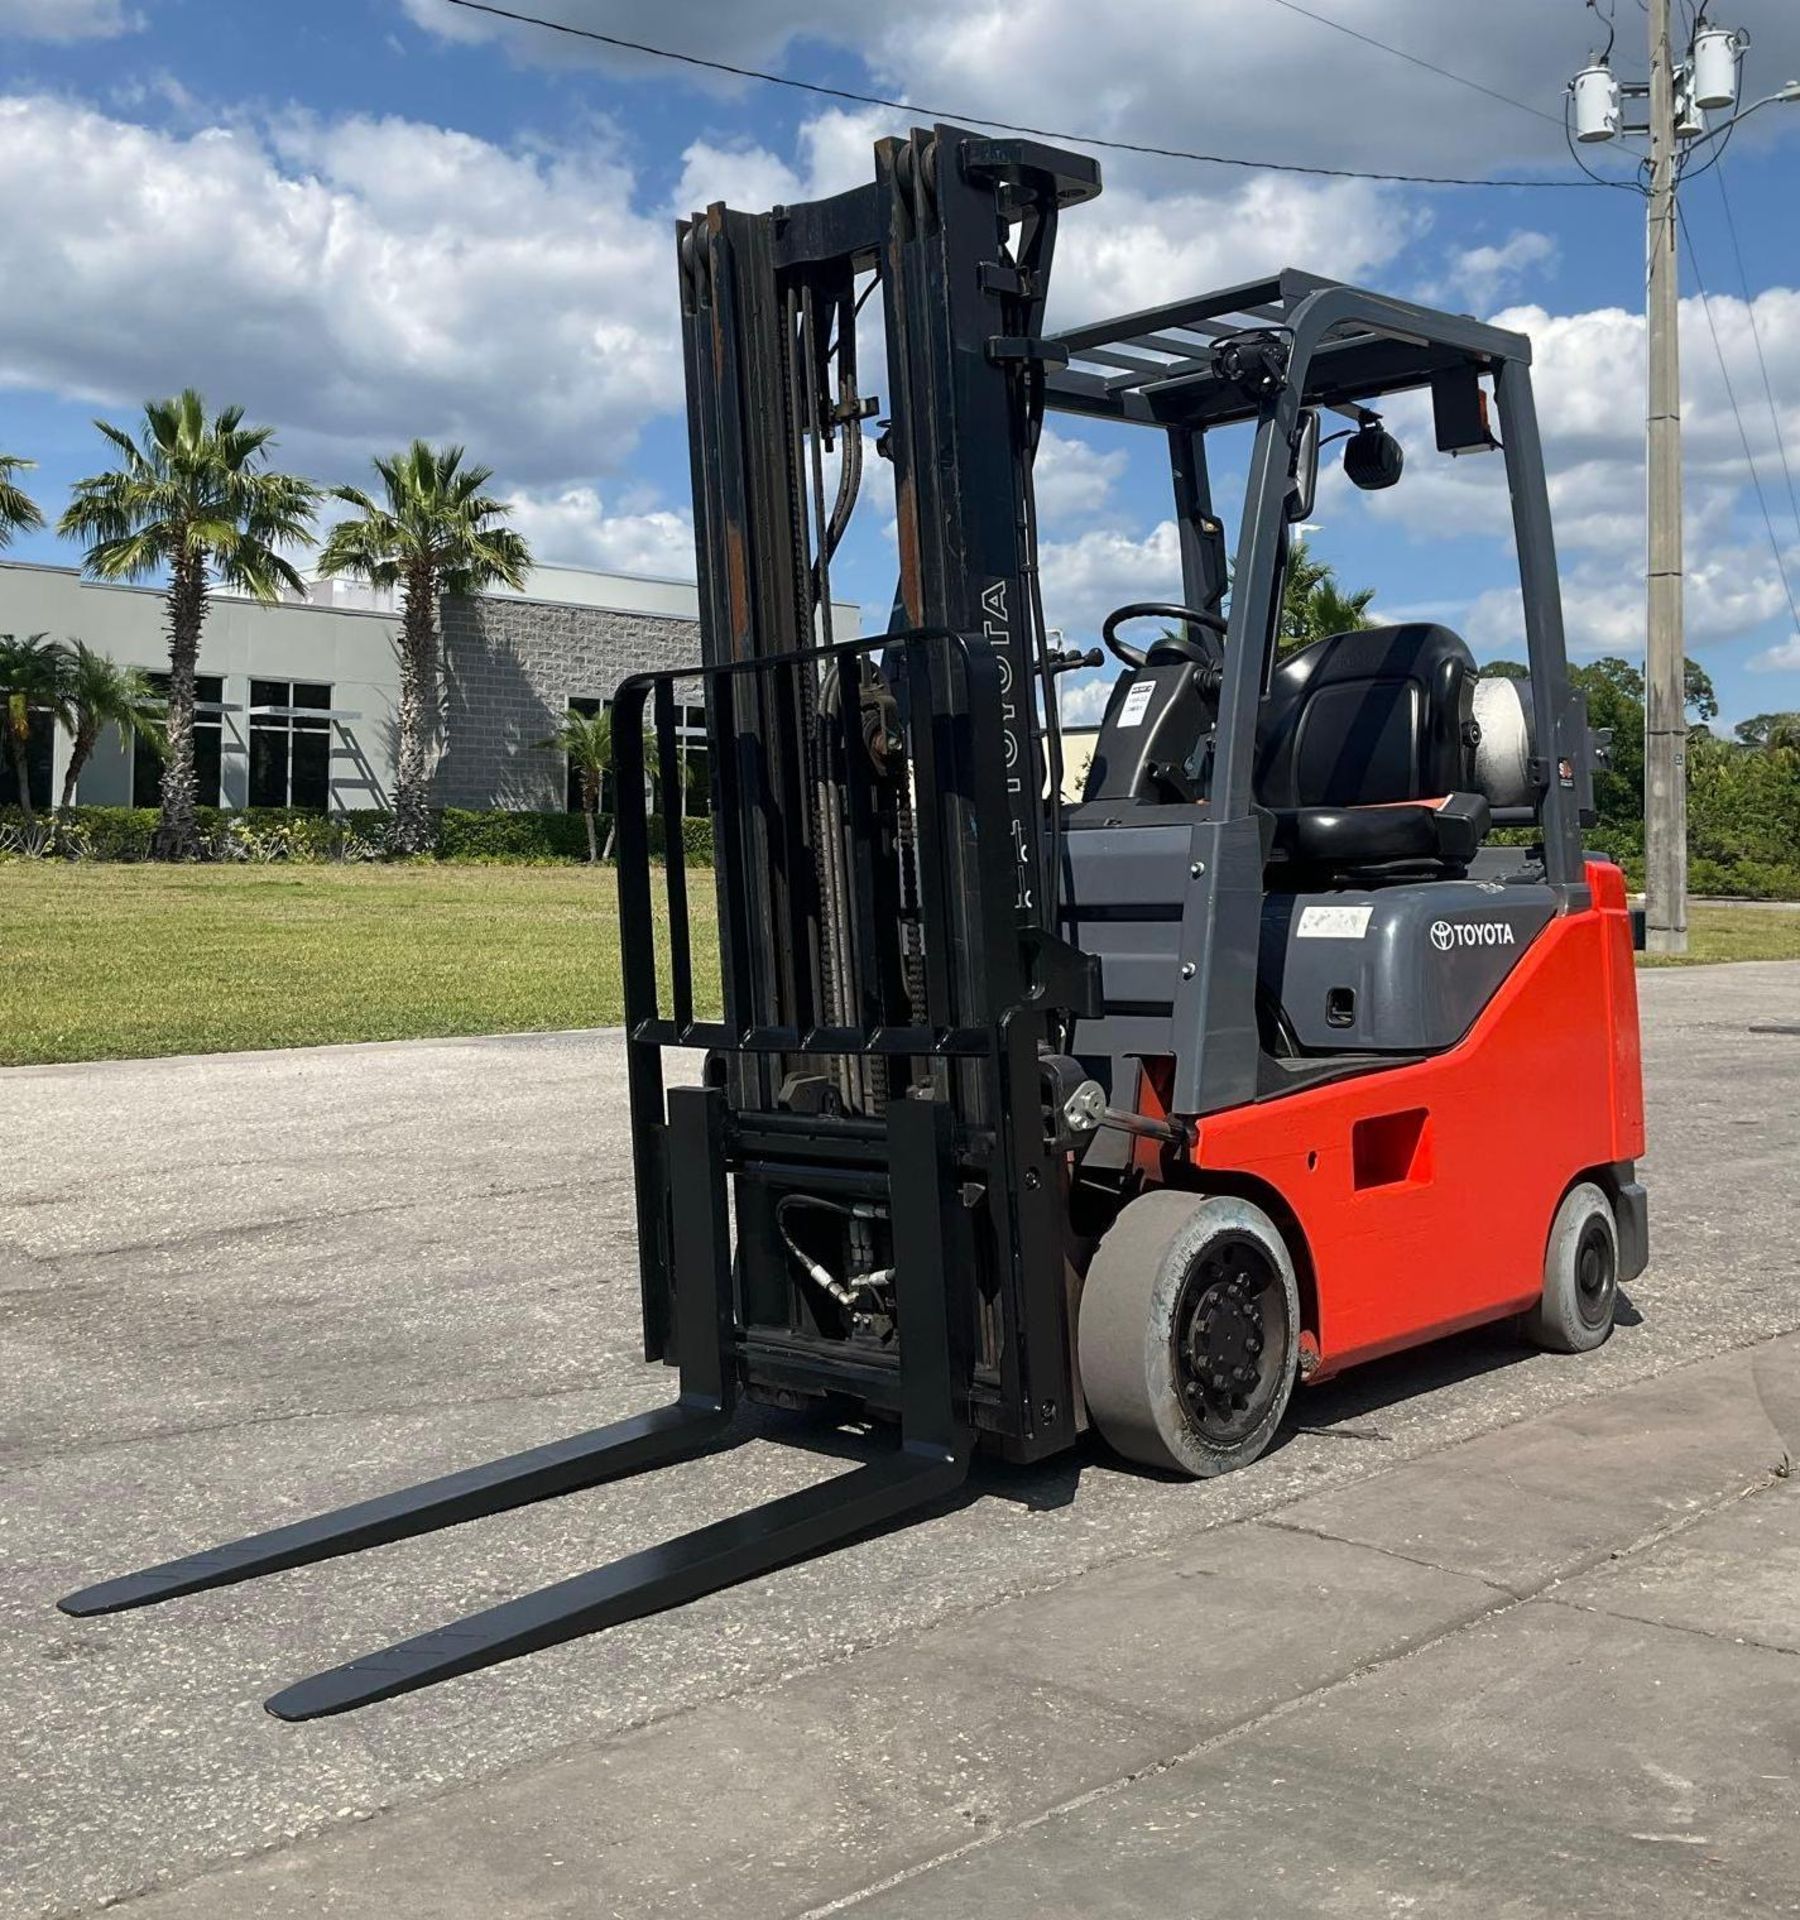 2019 TOYOTA FORKLIFT MODEL 8FGCU15, LP POWERED, APPROX MAX CAPACITY 2500, MAX HEIGHT 189in, TILT, - Image 2 of 12